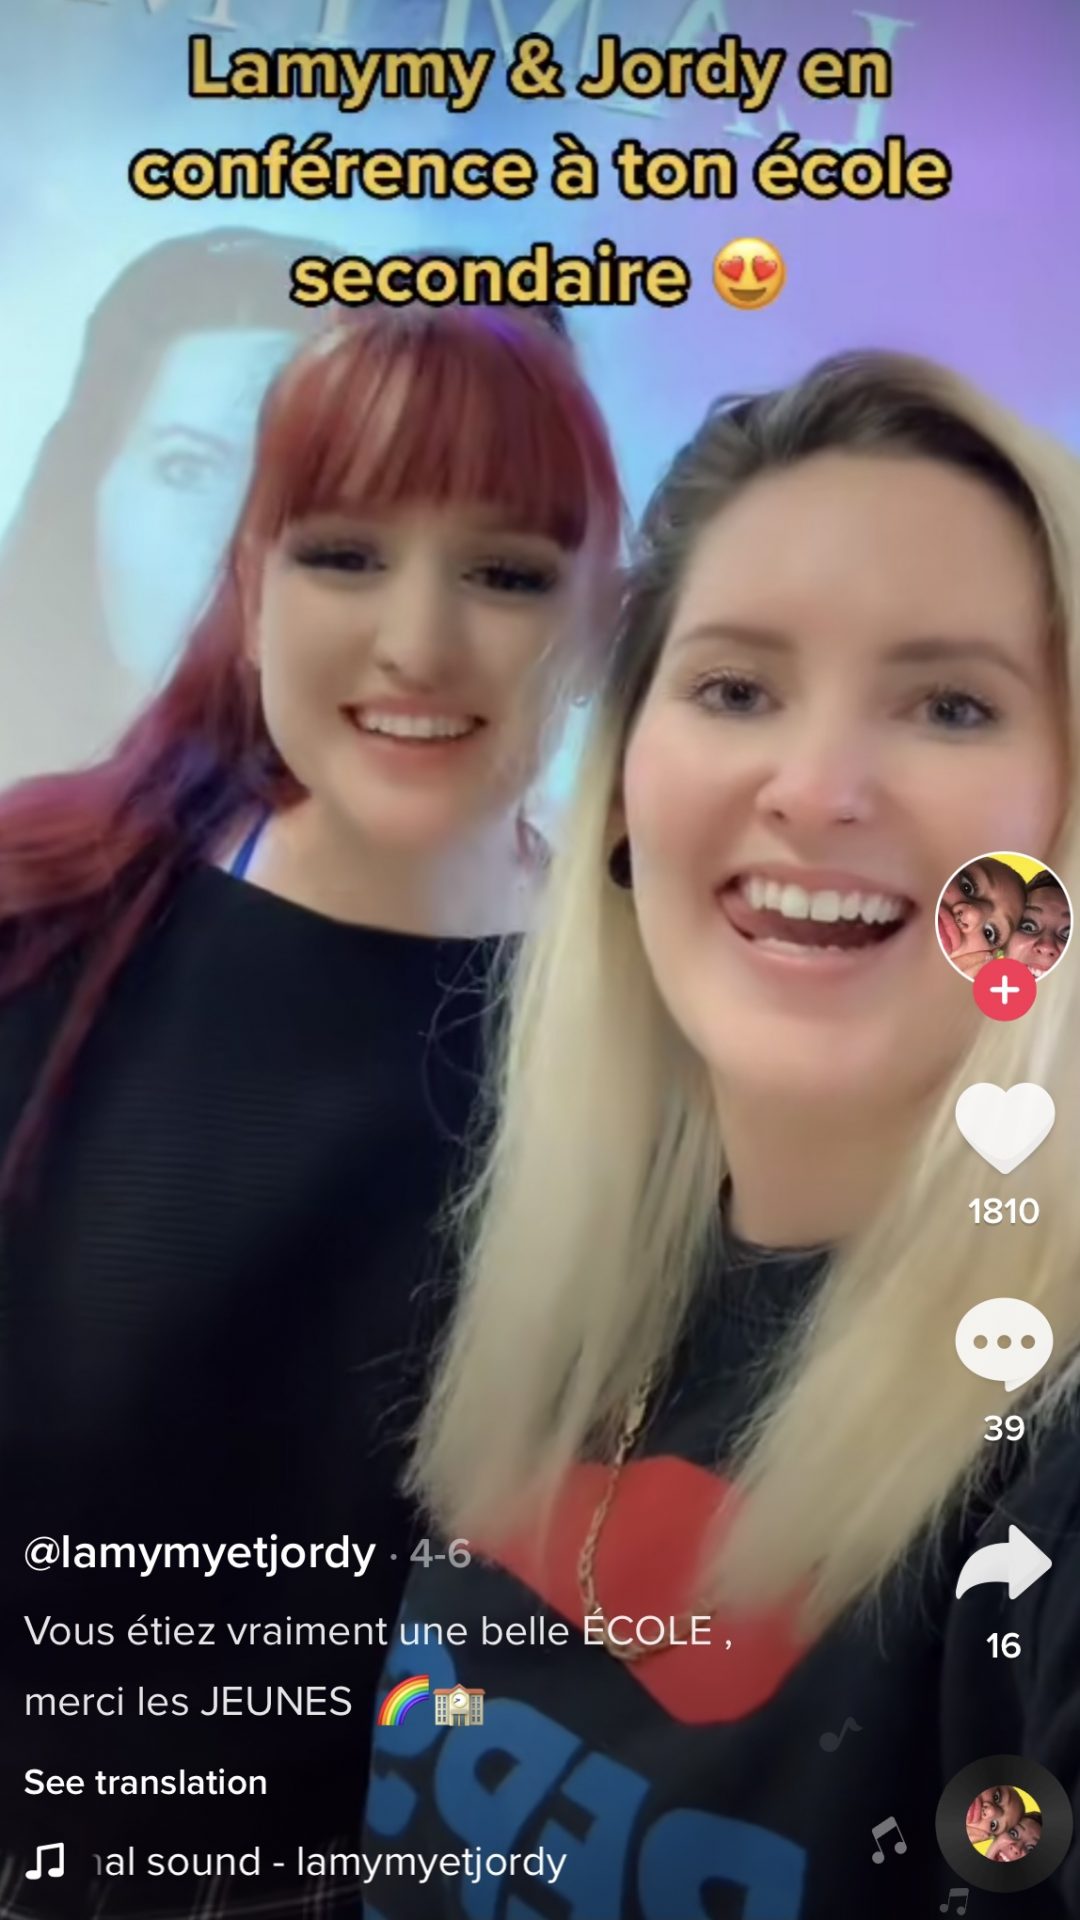 Screenshot image of two TikTok influencers smiling at the camera